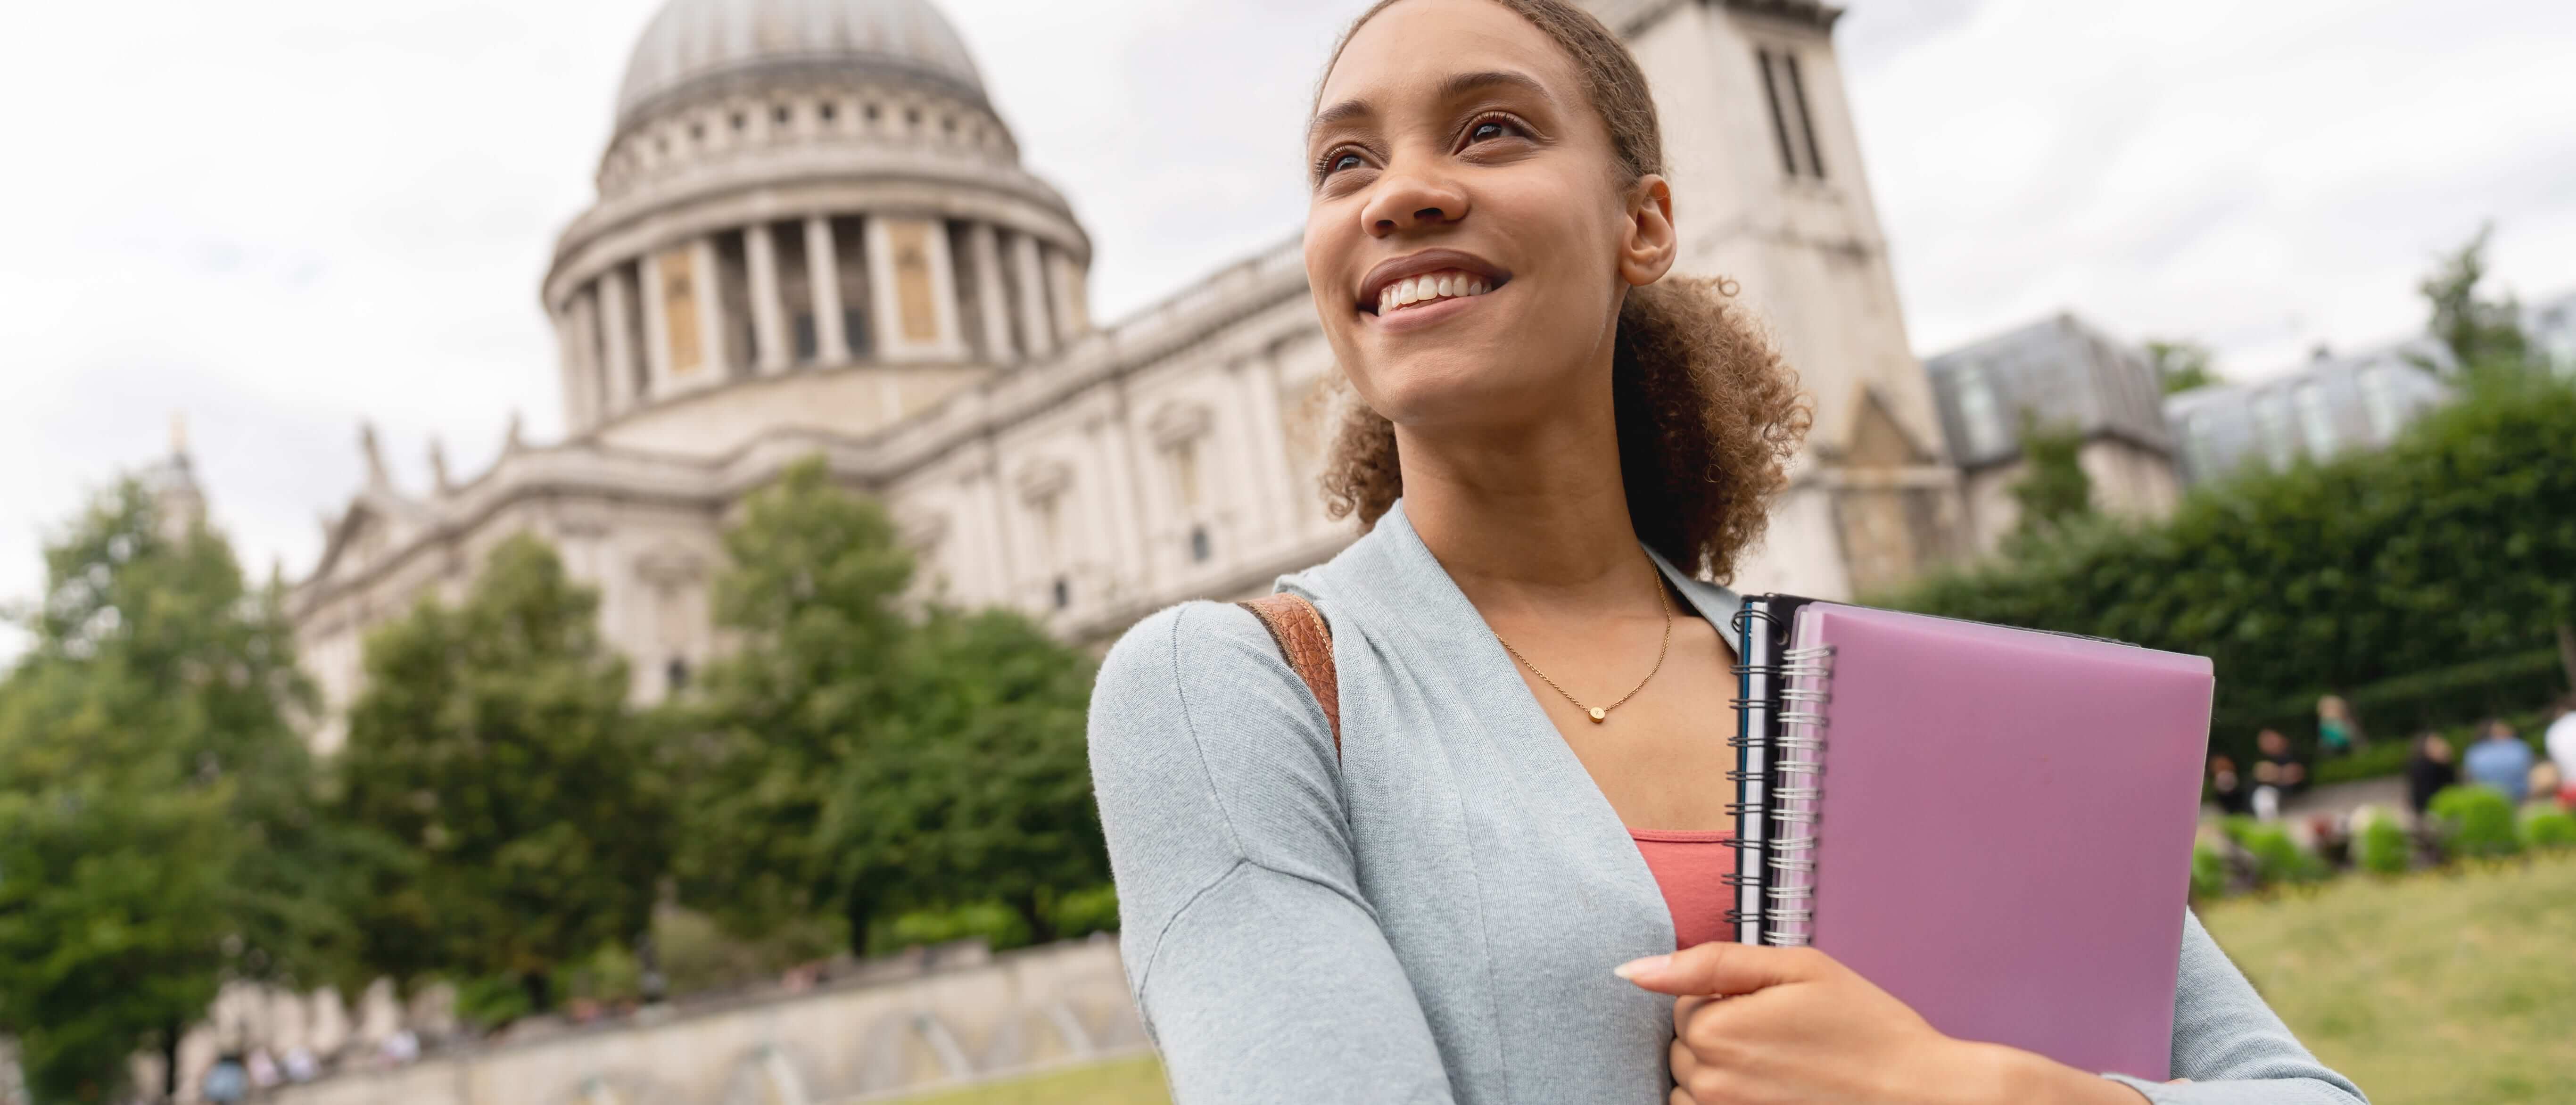 Female student hugging notebooks to her chest as she looks to the left with a big smile, a large marble building in the background.